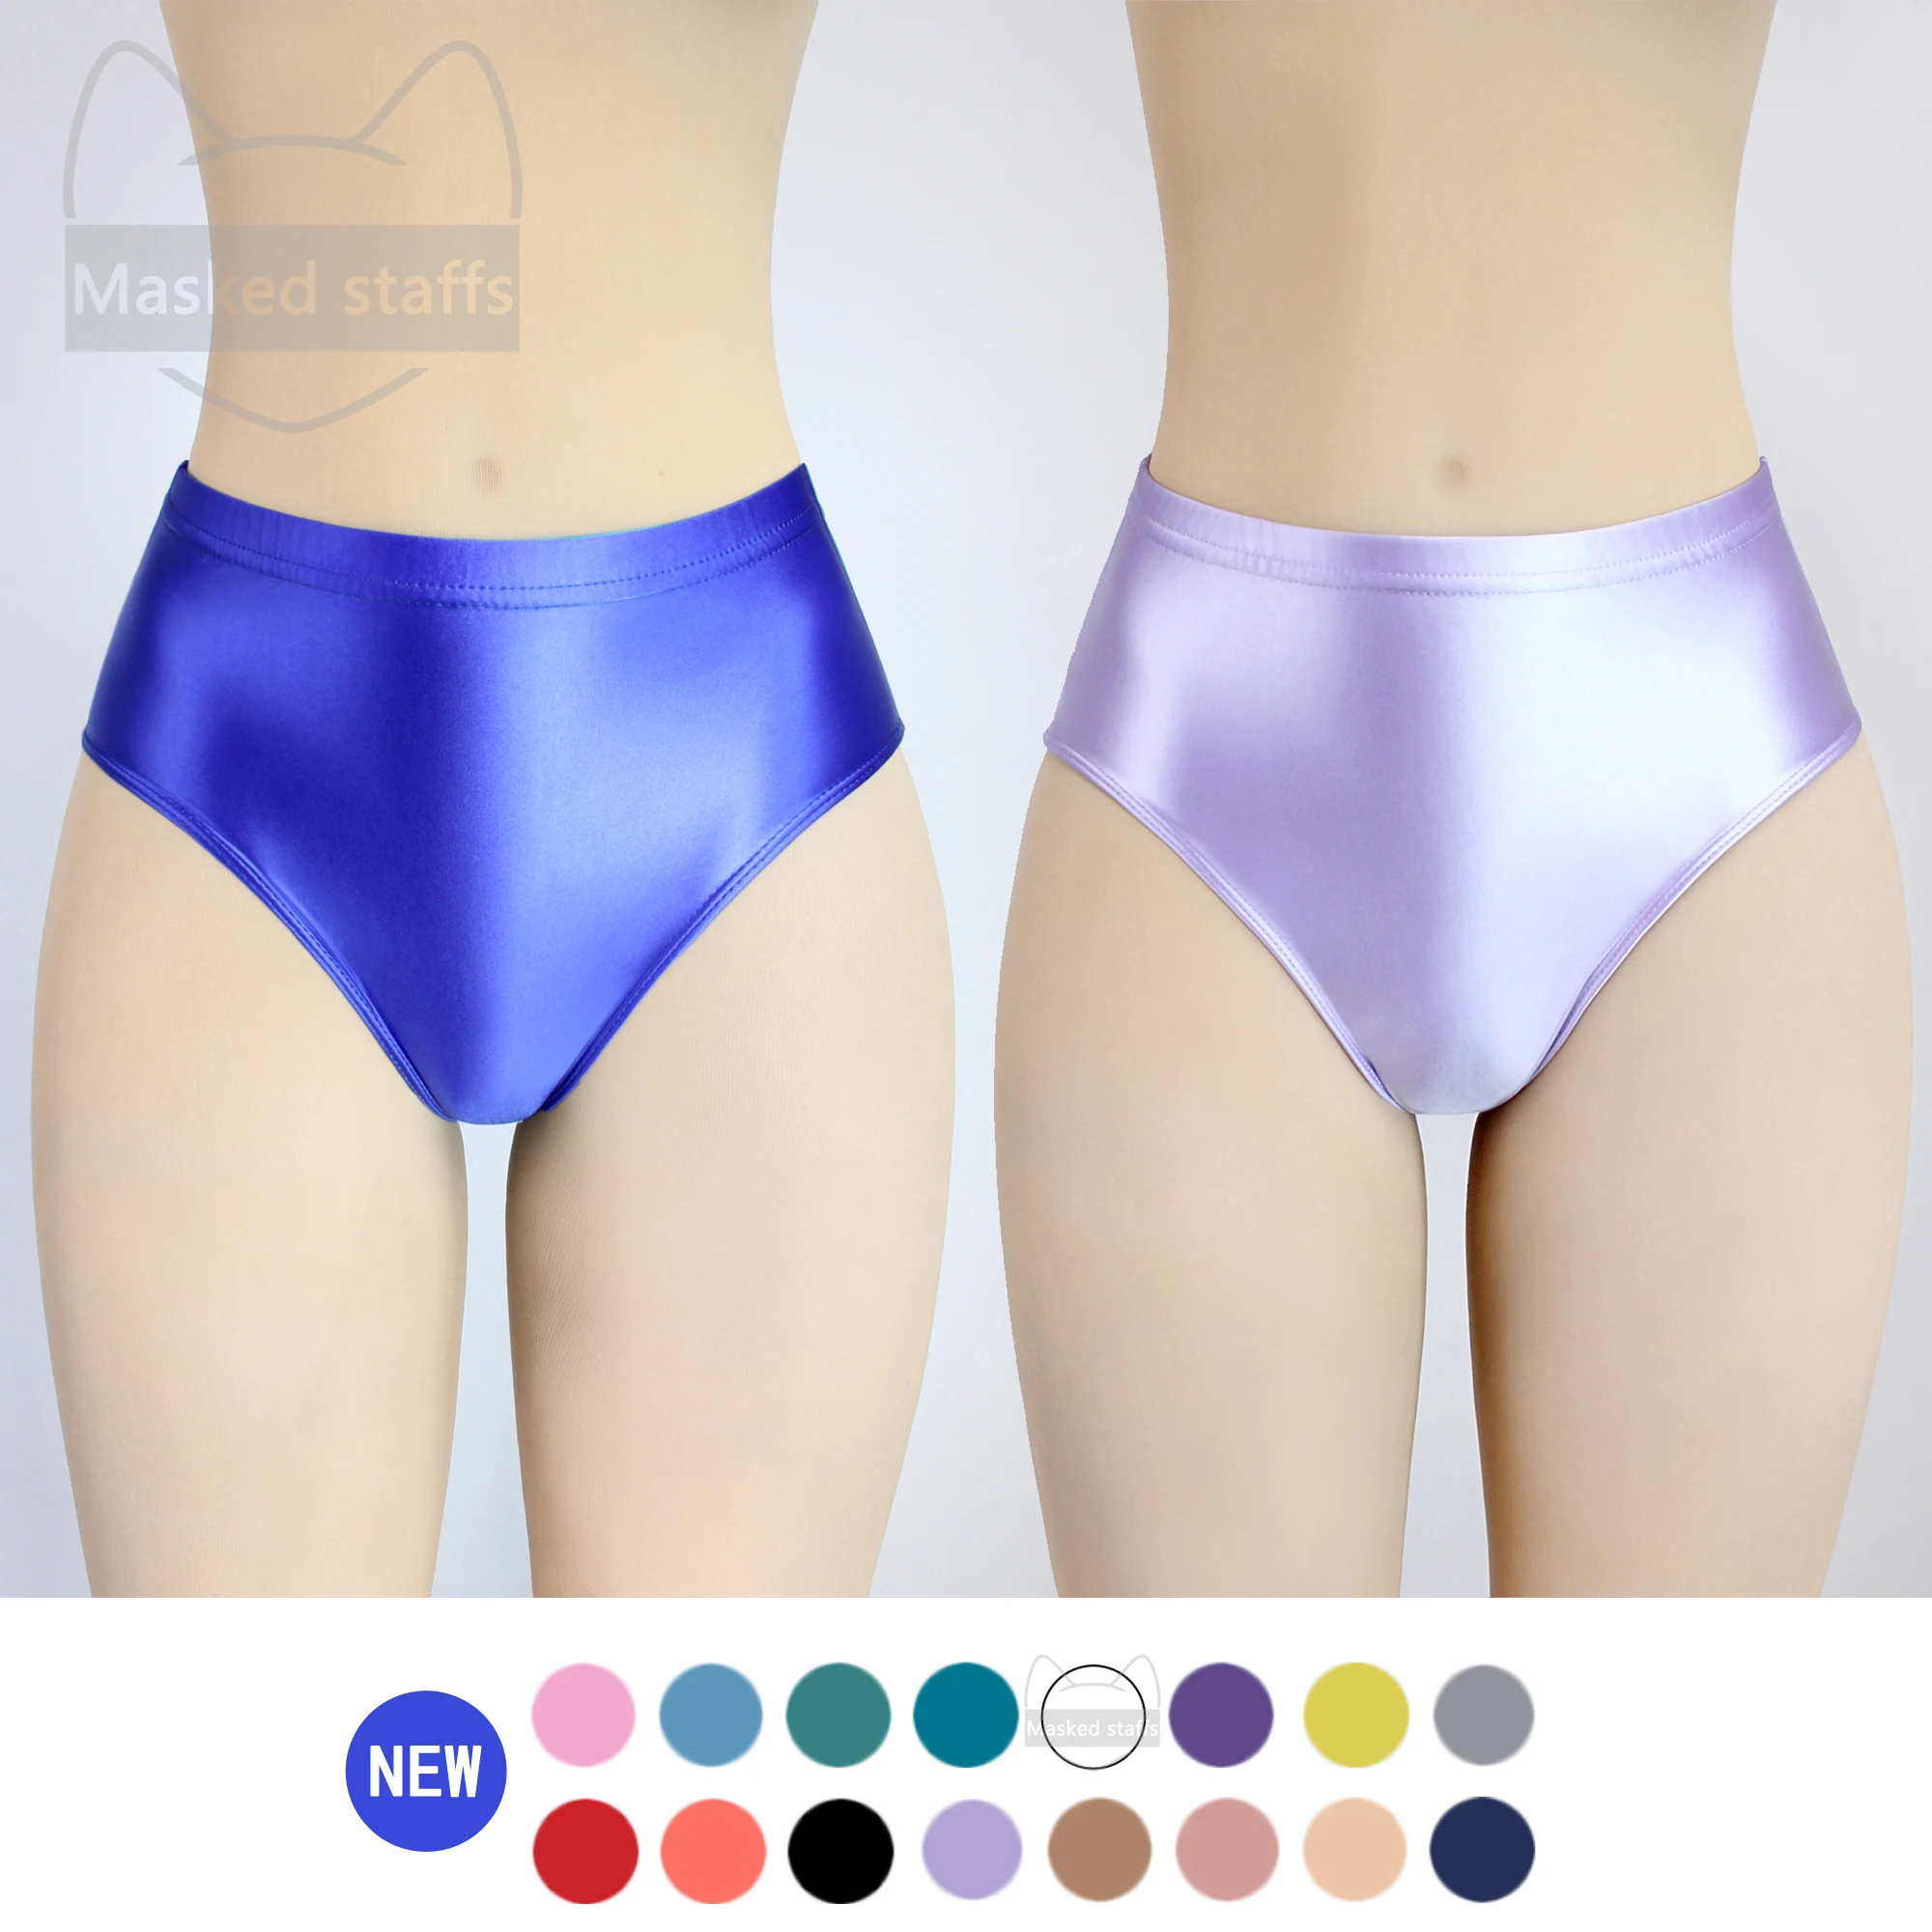 

Masked staffs glossy briefs pants with buttocks sexy Silky solid bikini middle-waist tights underpants and high fork Oily briefs